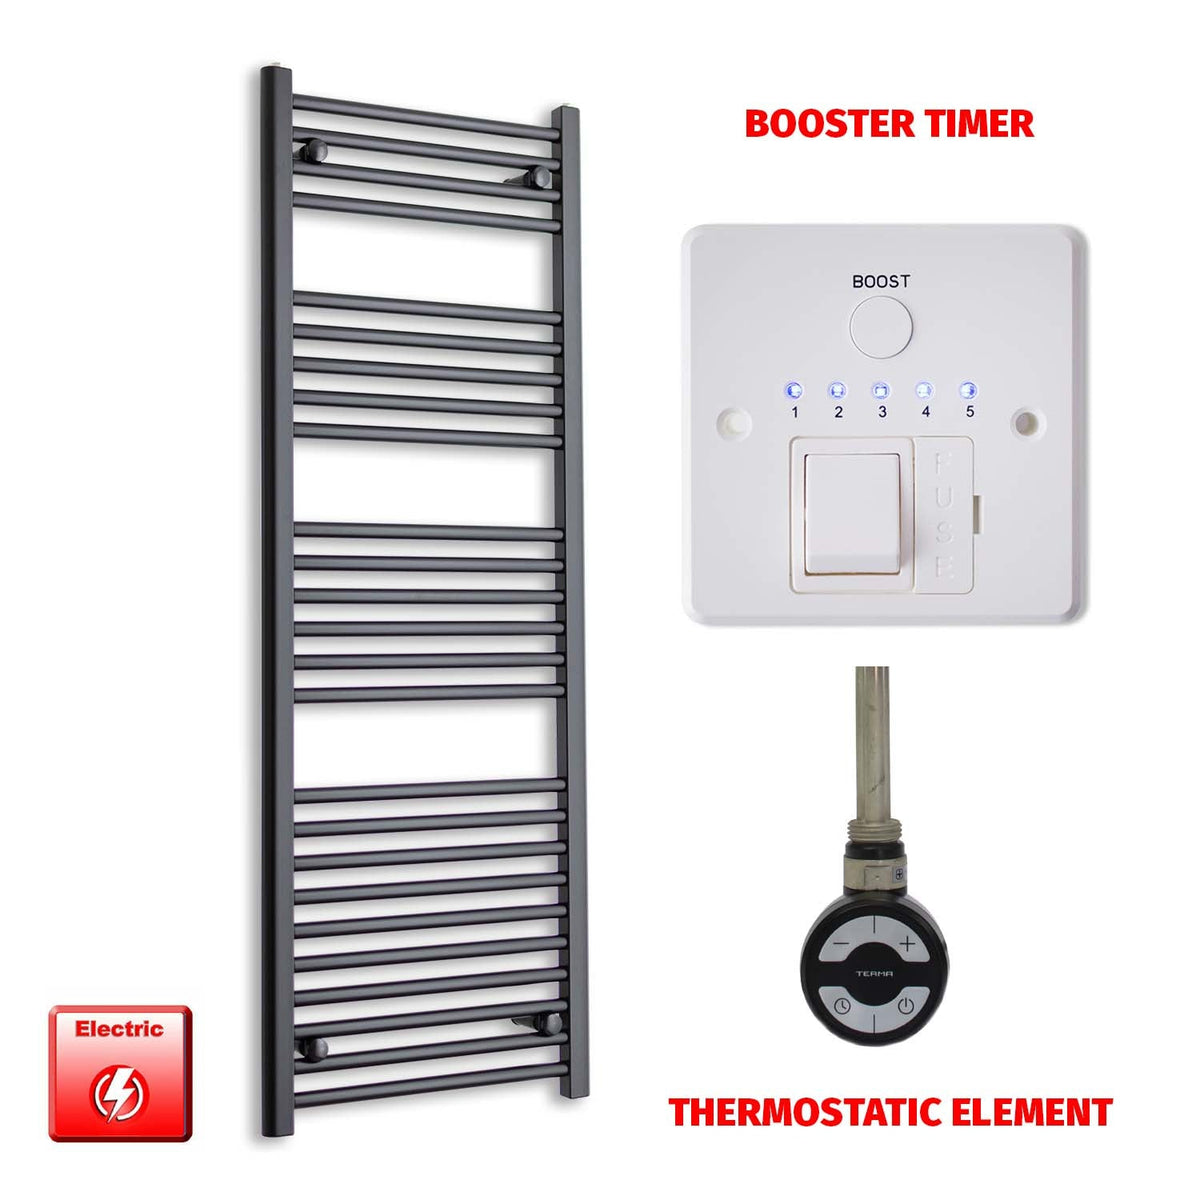 1400mm High 600mm Wide Flat Black Pre-Filled Electric Heated Towel Rail Radiator HTR MOA Thermostatic Booster Timer